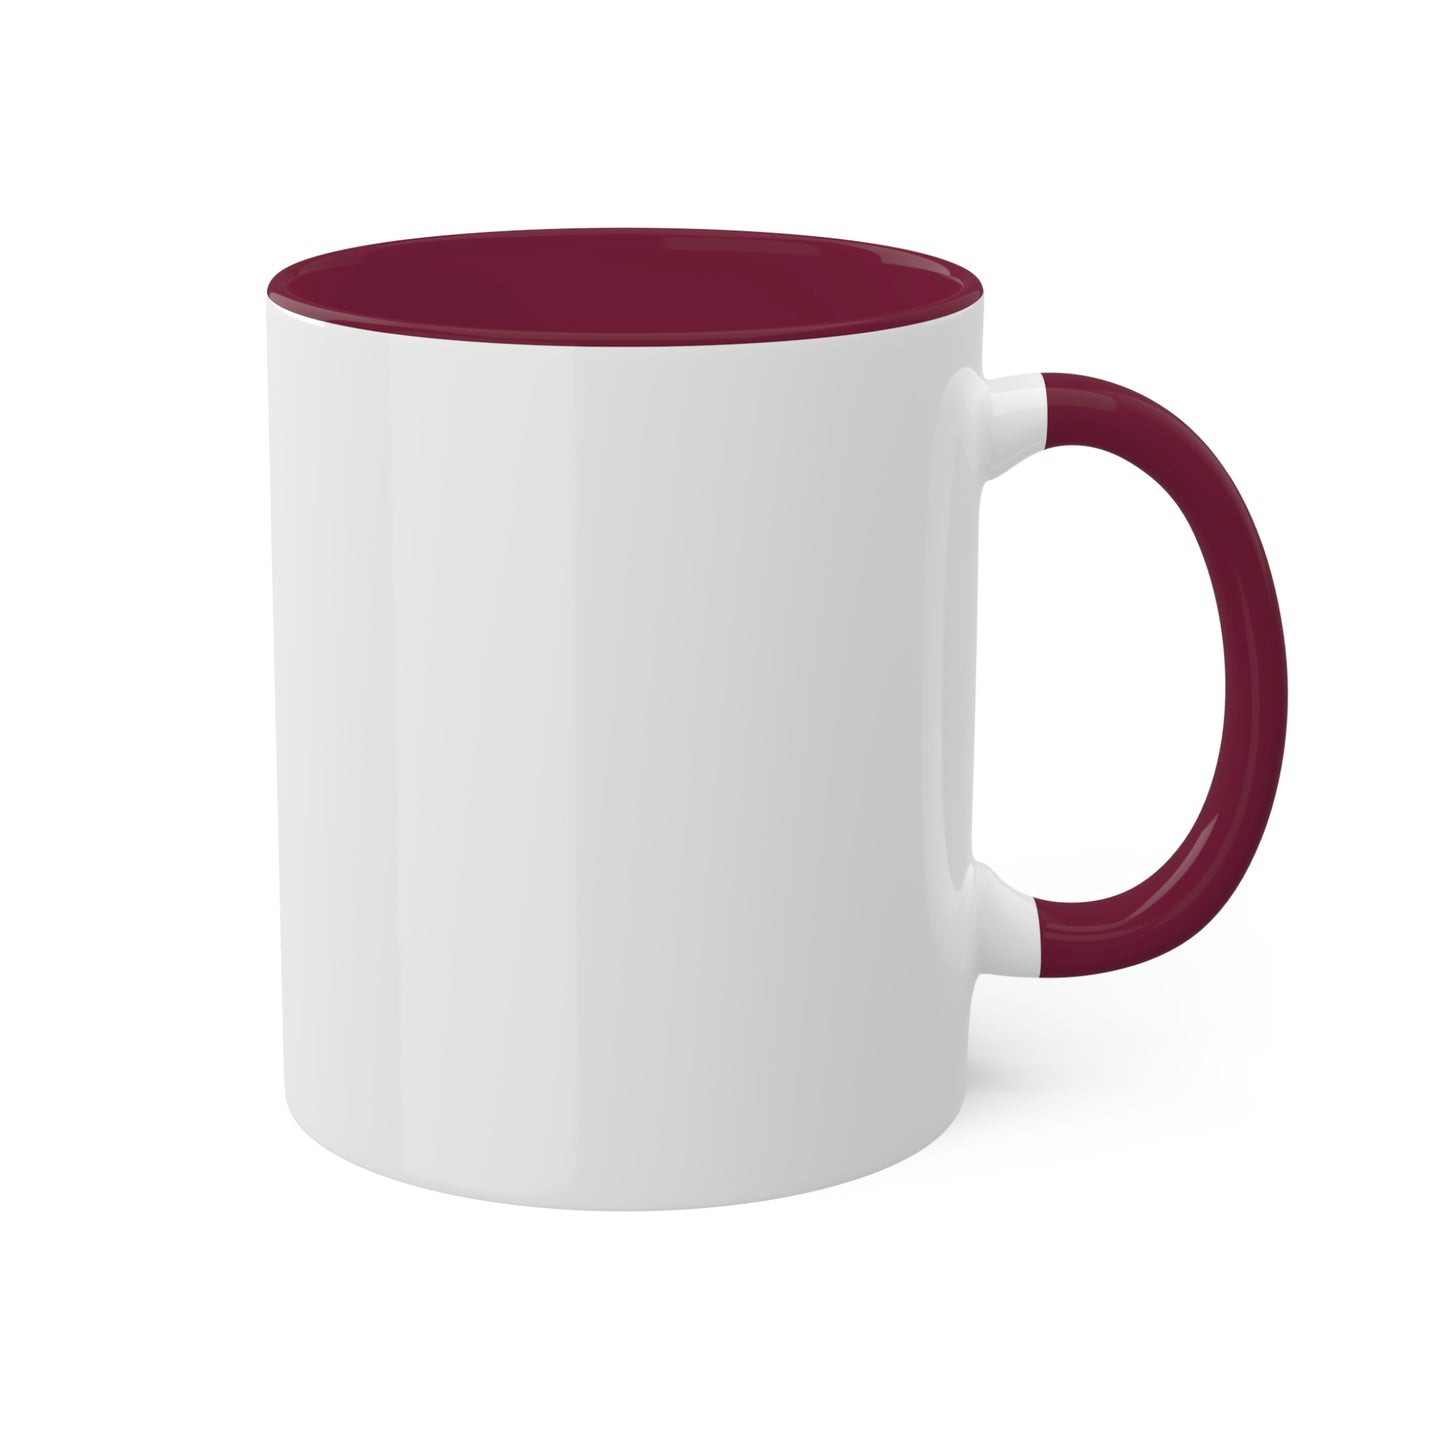 PPS Tower - Colorful Mugs, 11oz